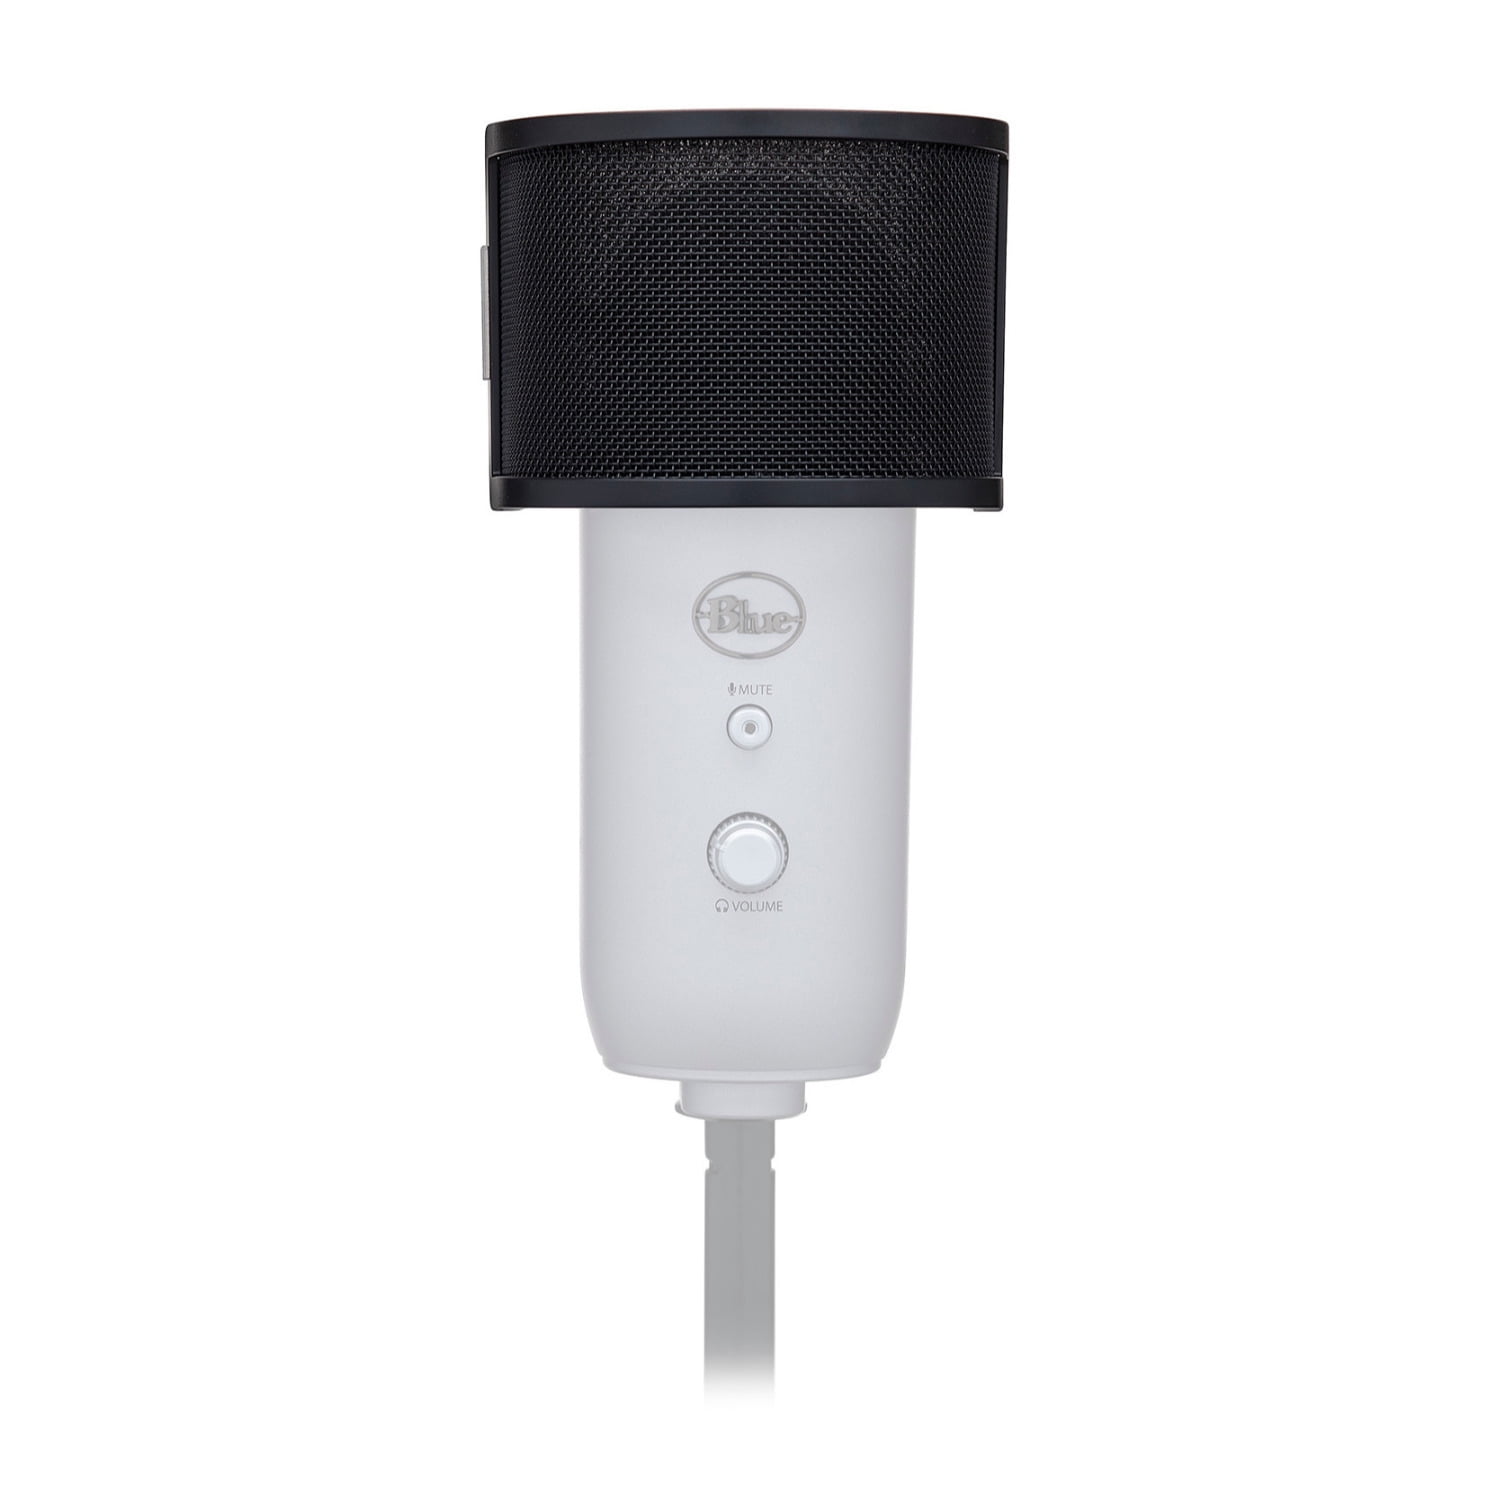 Rent Blue Yeti Professional Wired Multi-Pattern Condenser USB Microphone  from $6.90 per month